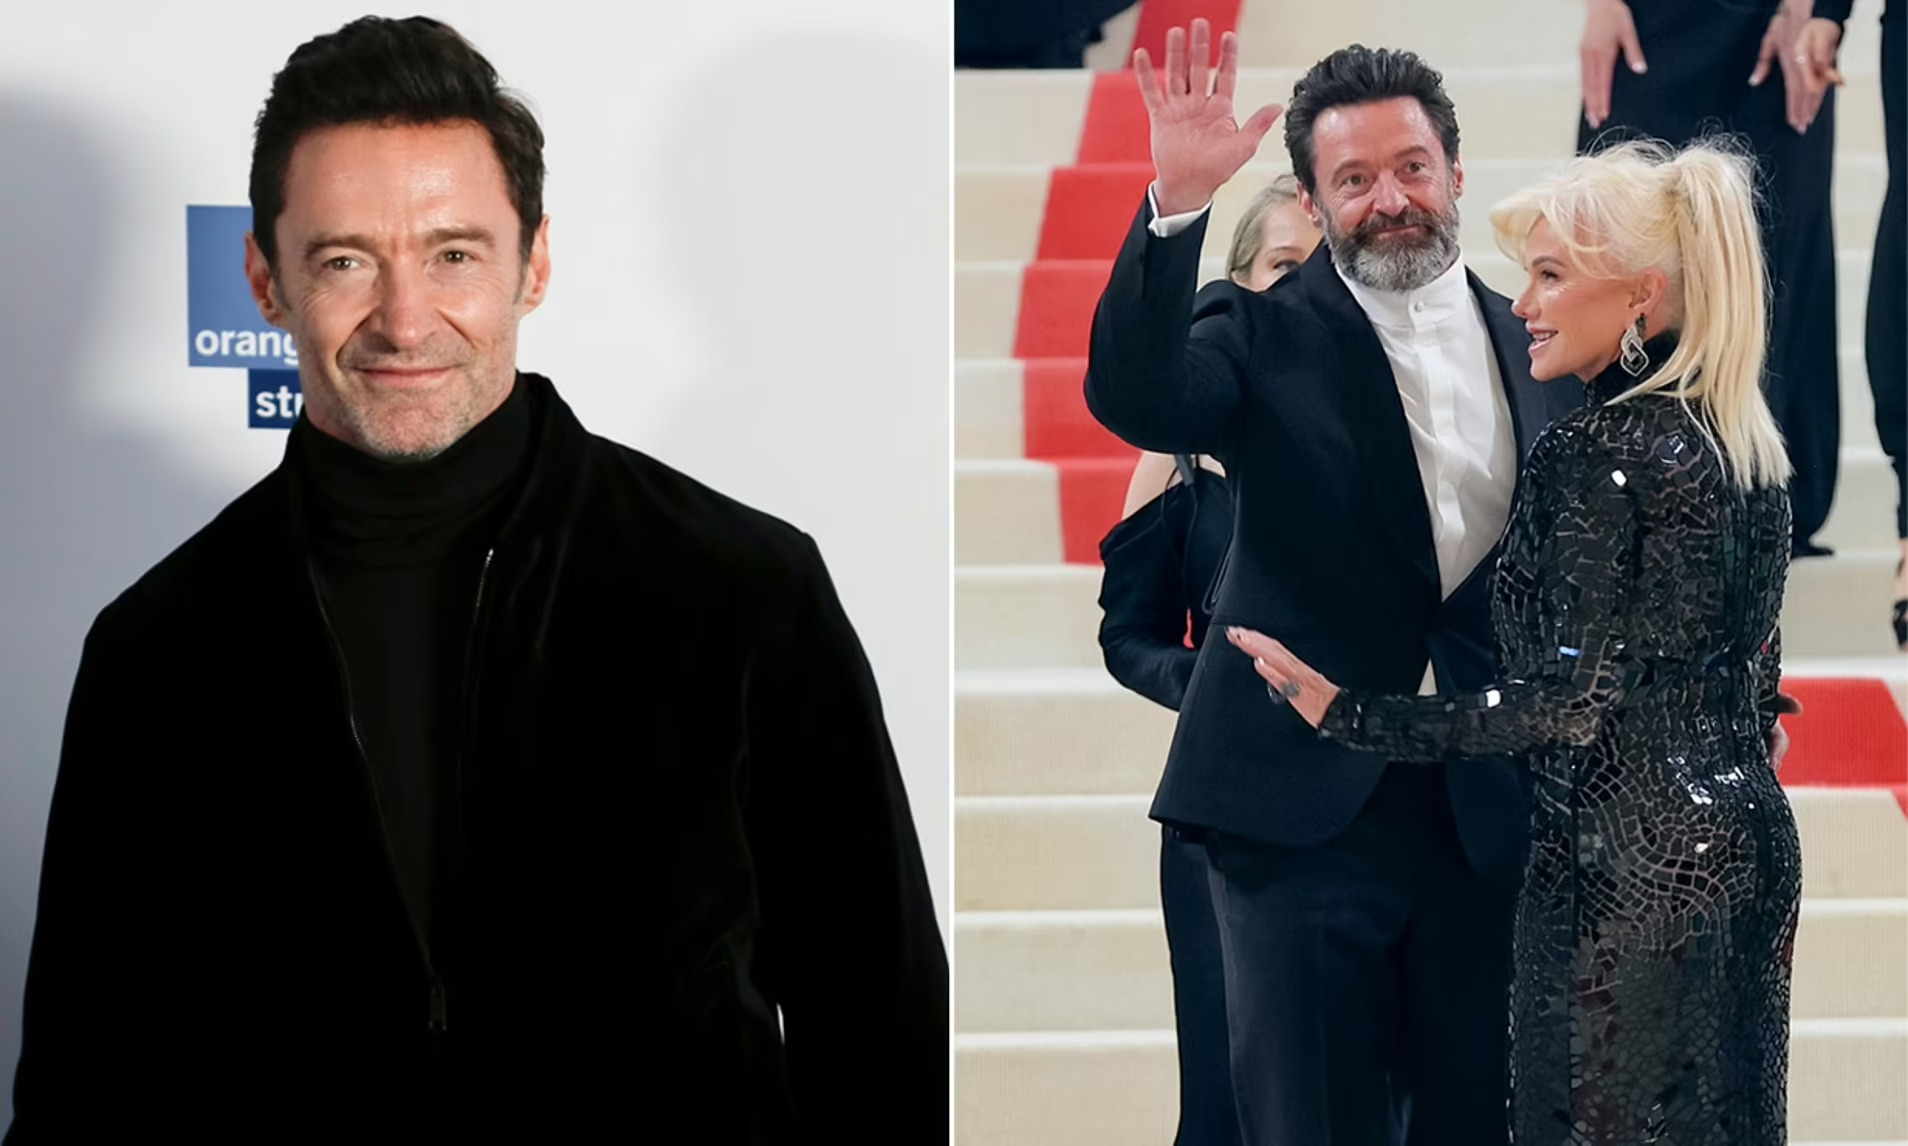 The telltale sign that Hugh Jackman had 'moved on' from wife Deborra-Lee Furness months before the couple ended their marriage after 27 years